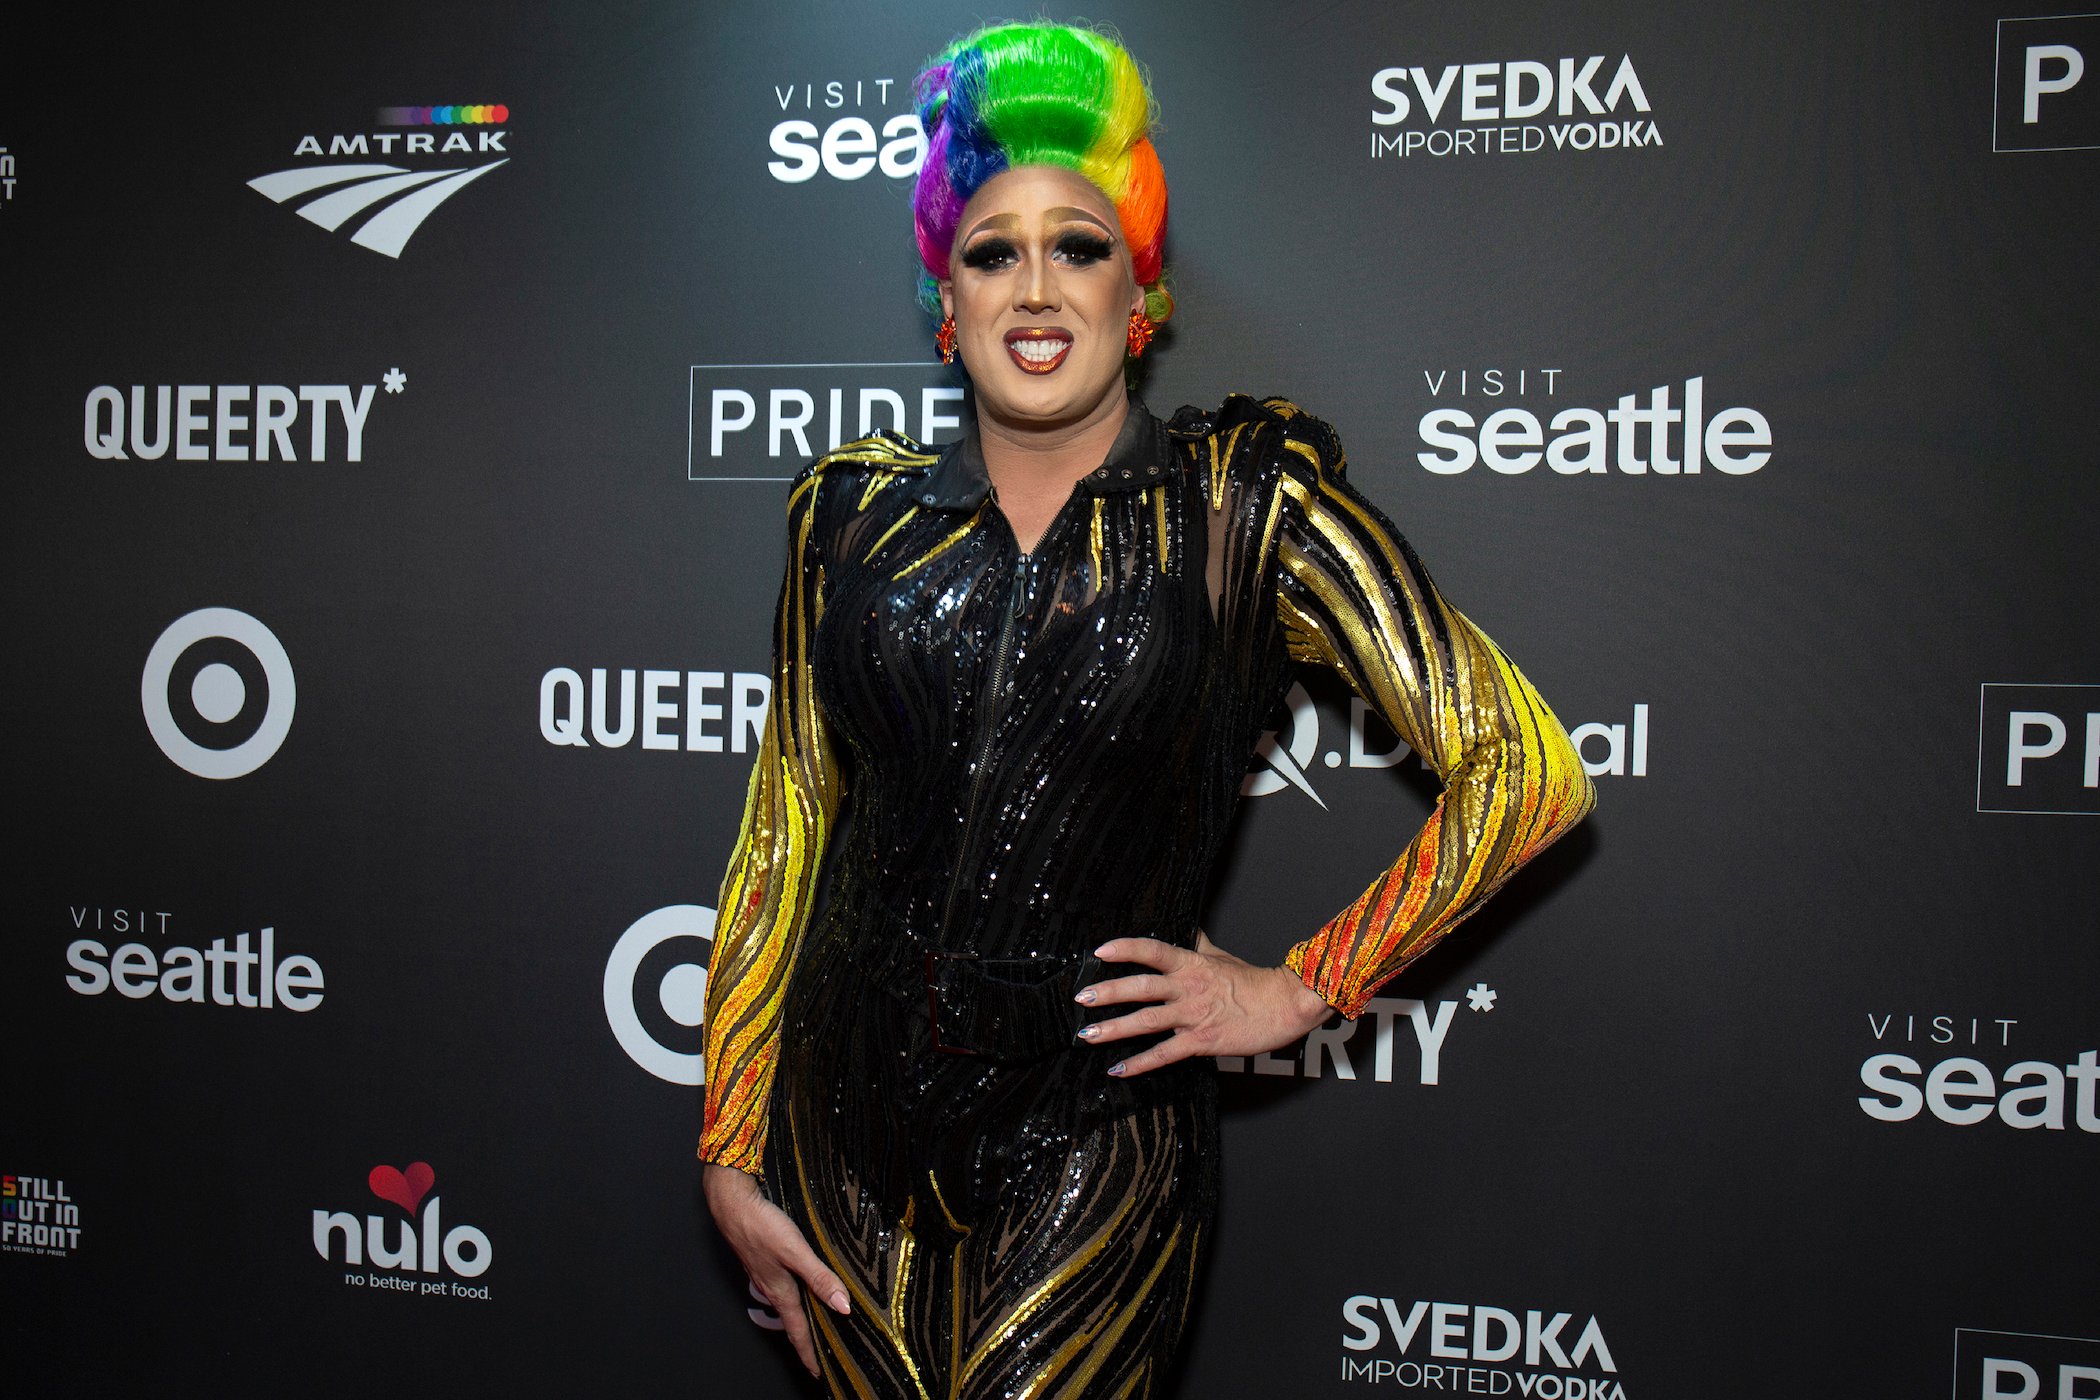 Tina Burner of 'RuPaul's Drag Race' attends the 2nd Annual Queerty 'Pride50' event